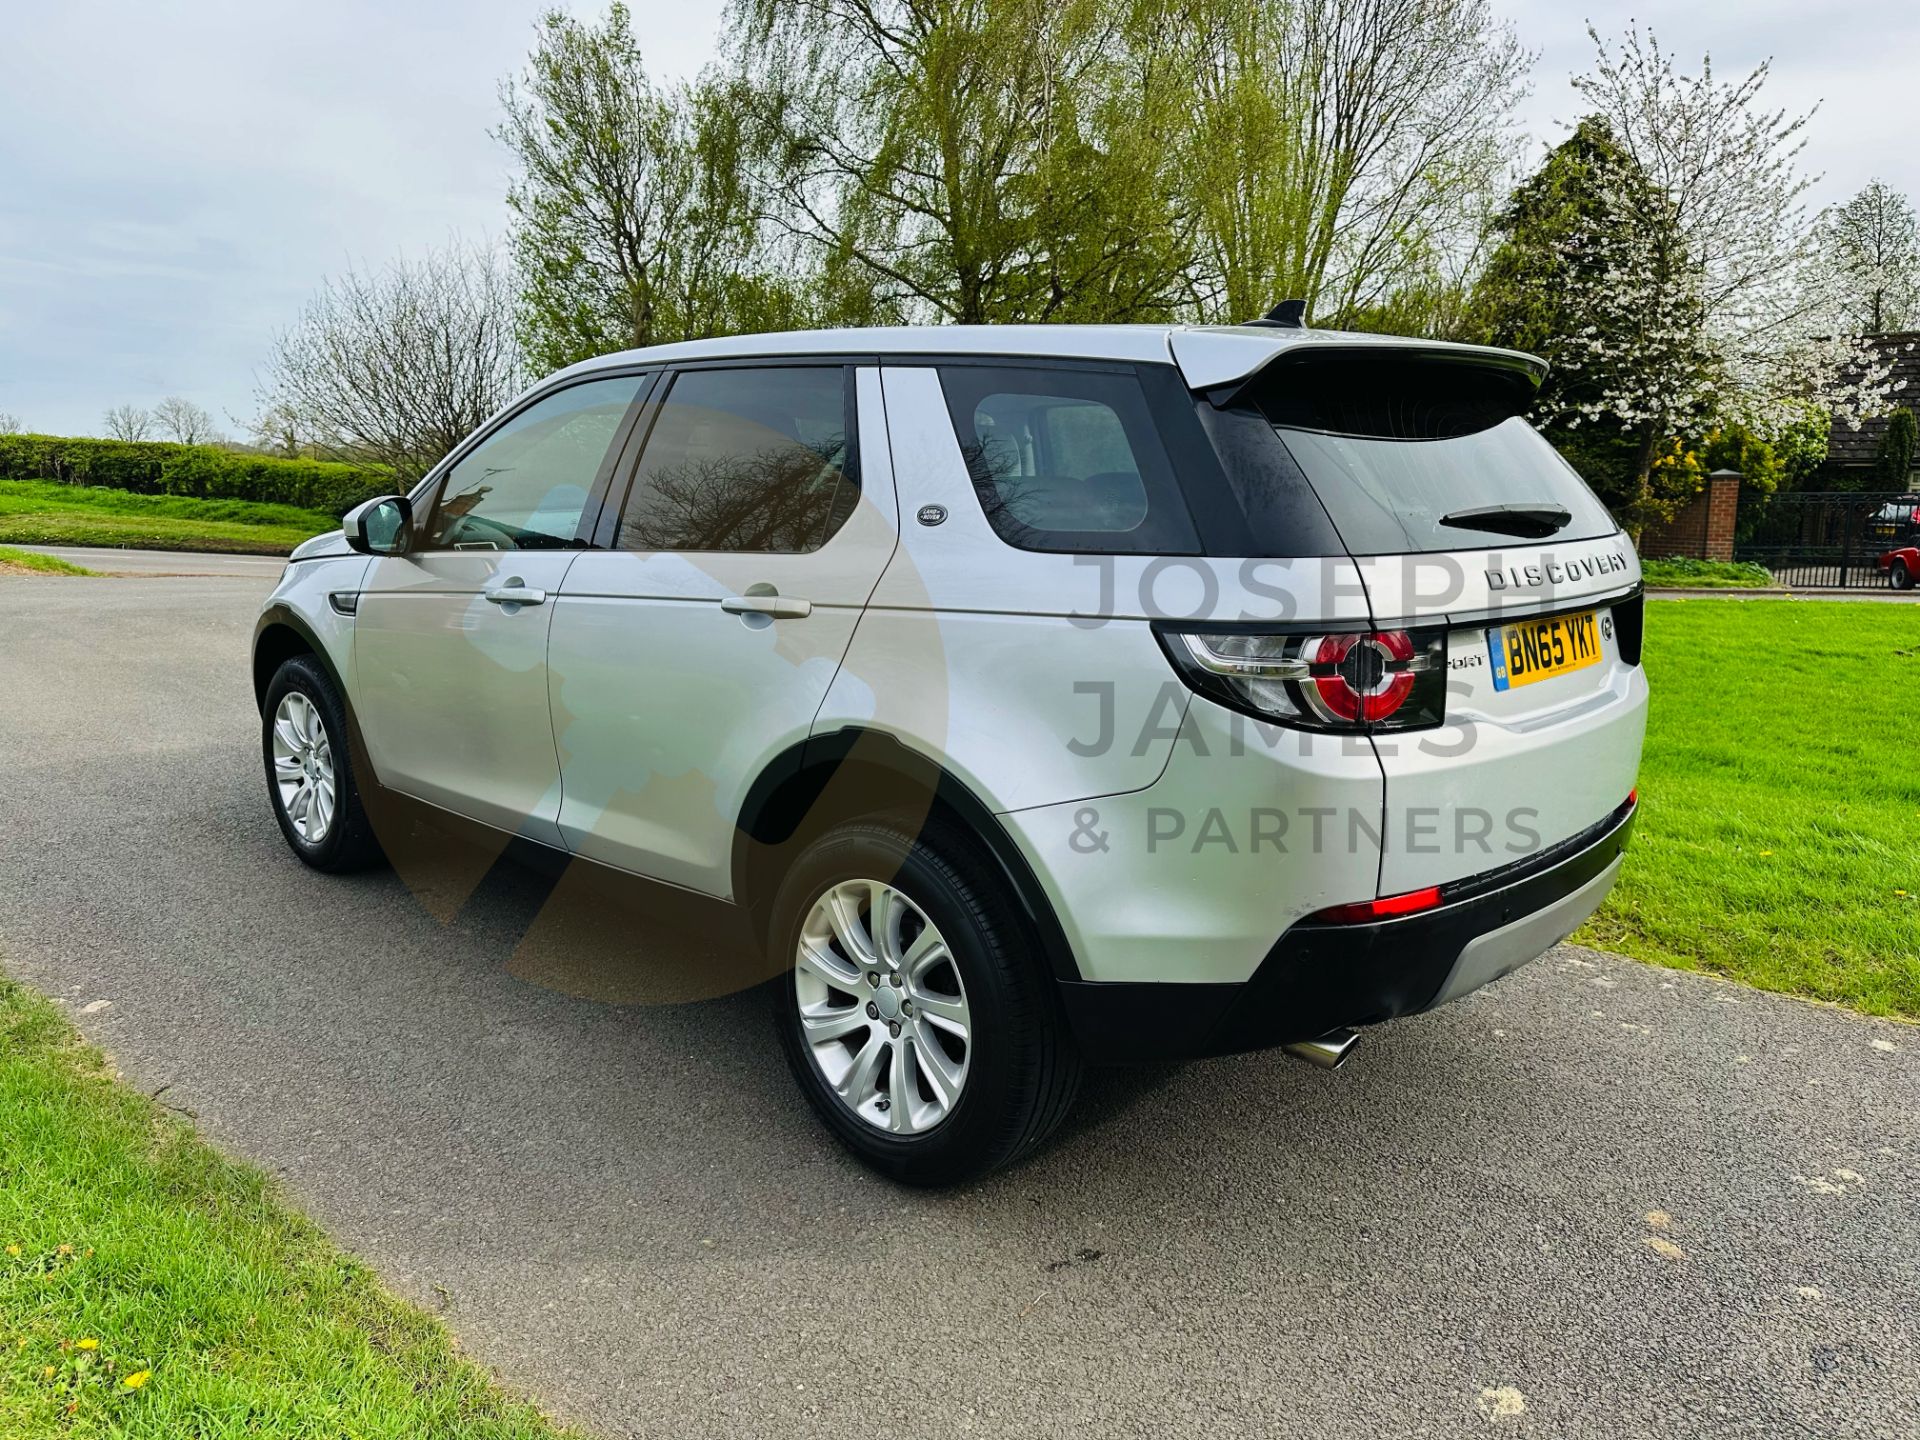 (ON SALE) LAND ROVER DISCOVERY SPORT *SE TECH* 7 SEATER SUV (2016 - EURO 6) 2.0 TD4 - AUTO *NO VAT* - Image 7 of 41